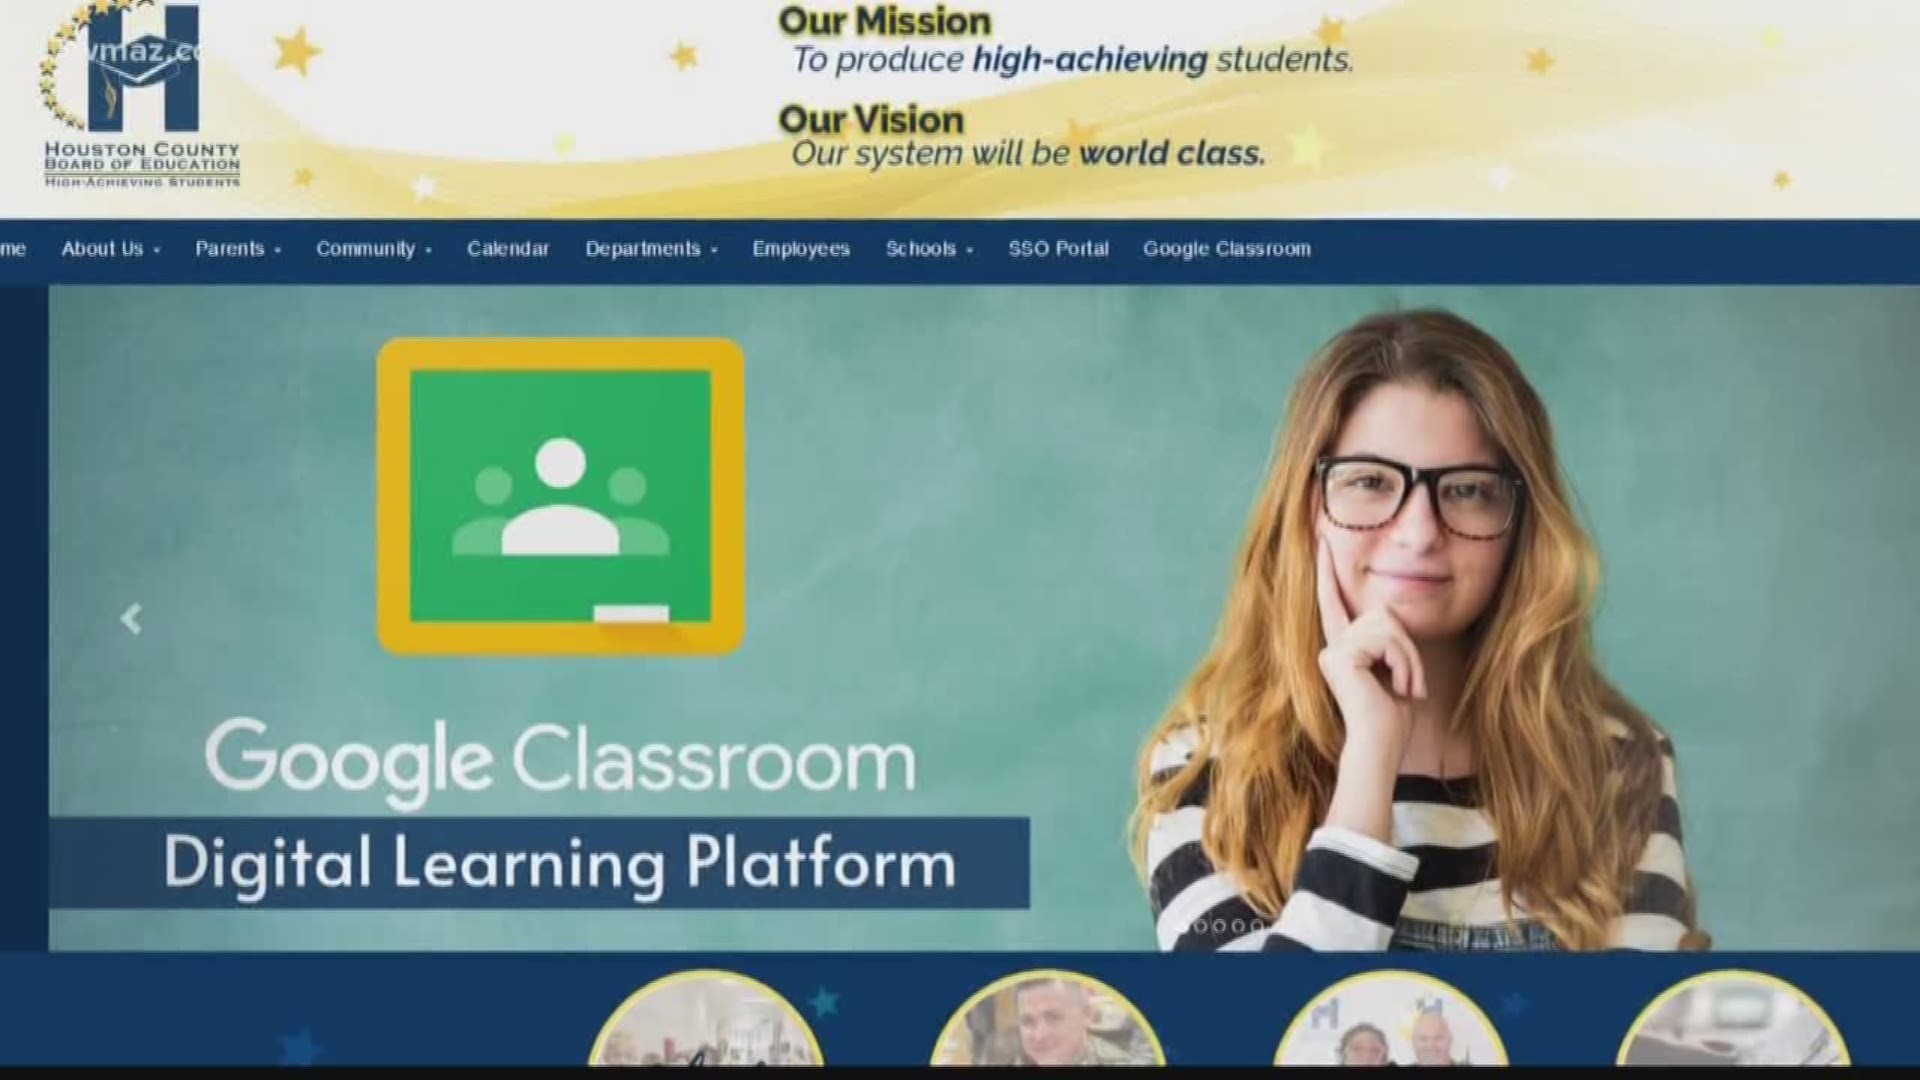 Starting Monday, the entire district will access digital learning from home on Google Classrooms.